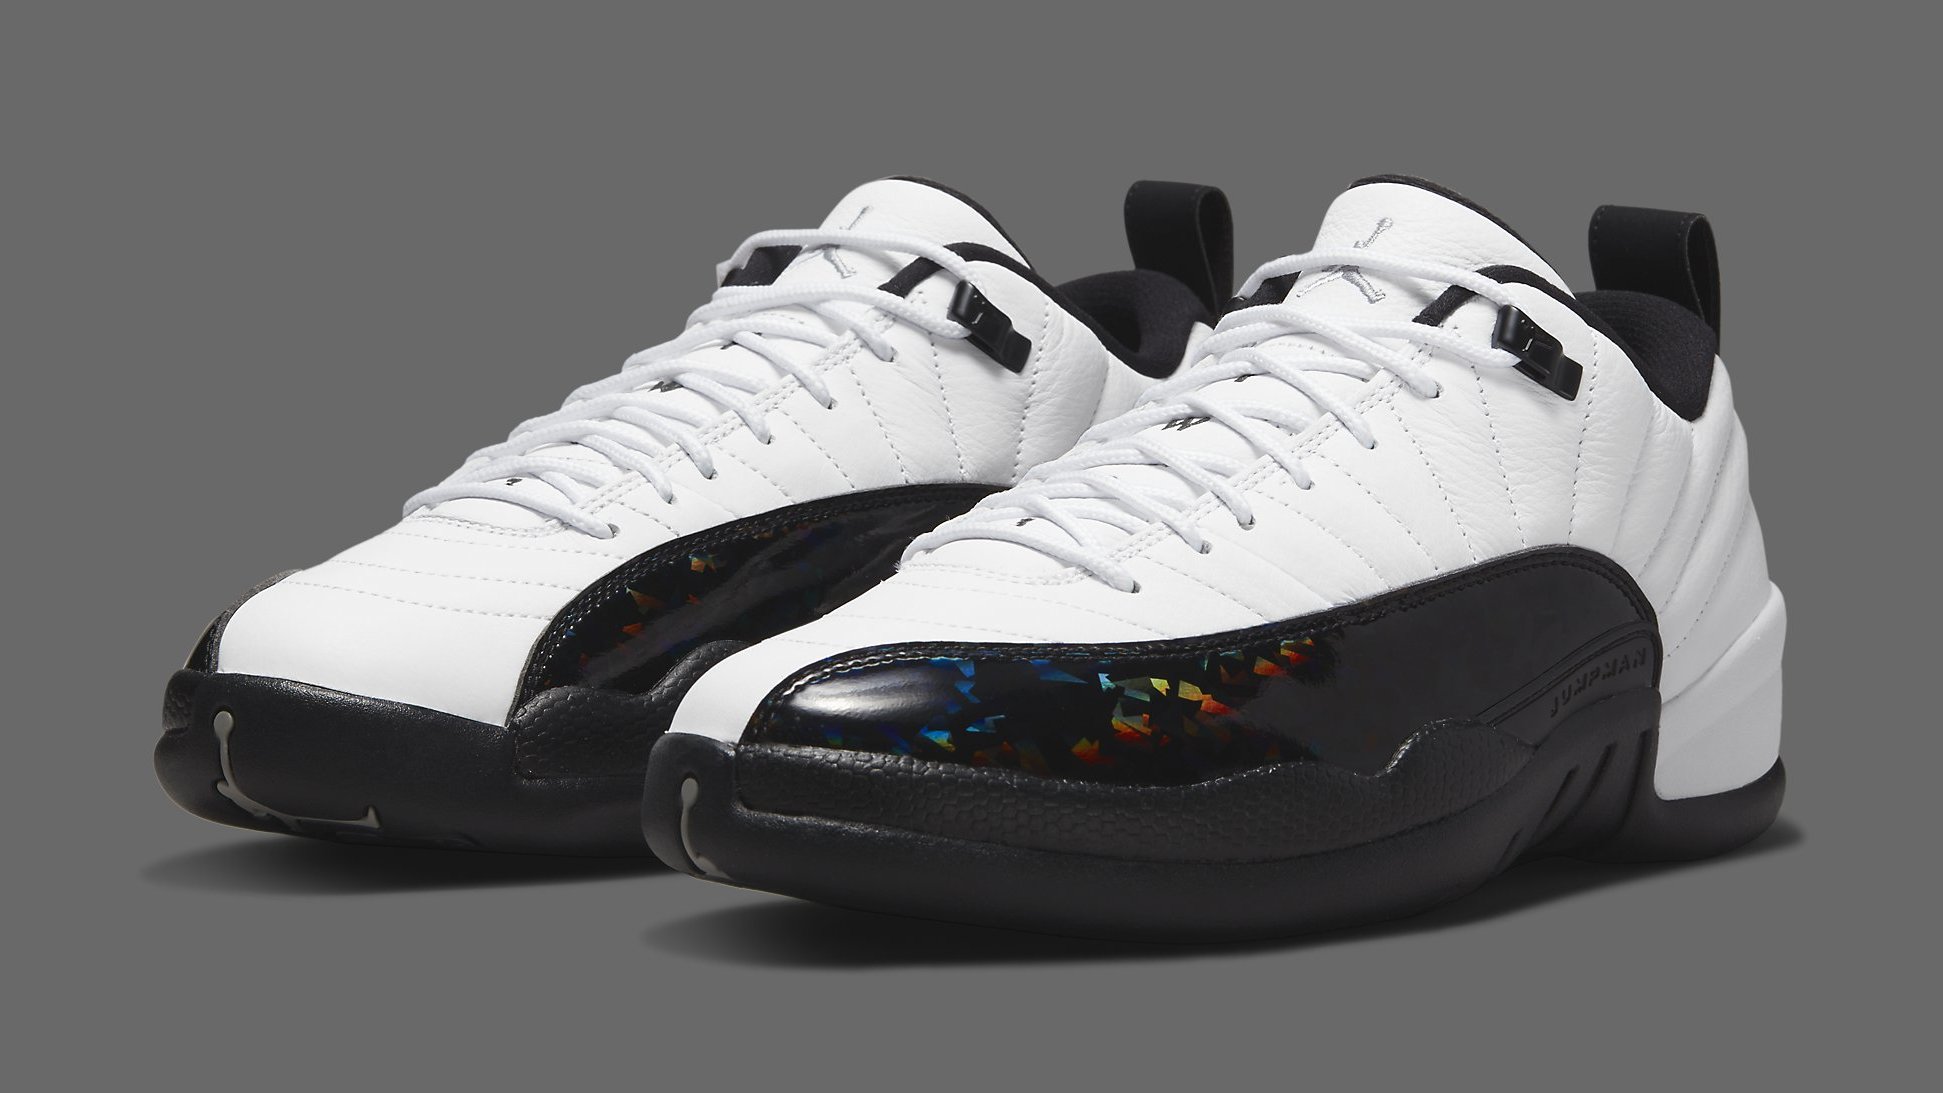 Buy Air Jordan 12 Shoes: New Releases & Iconic Styles